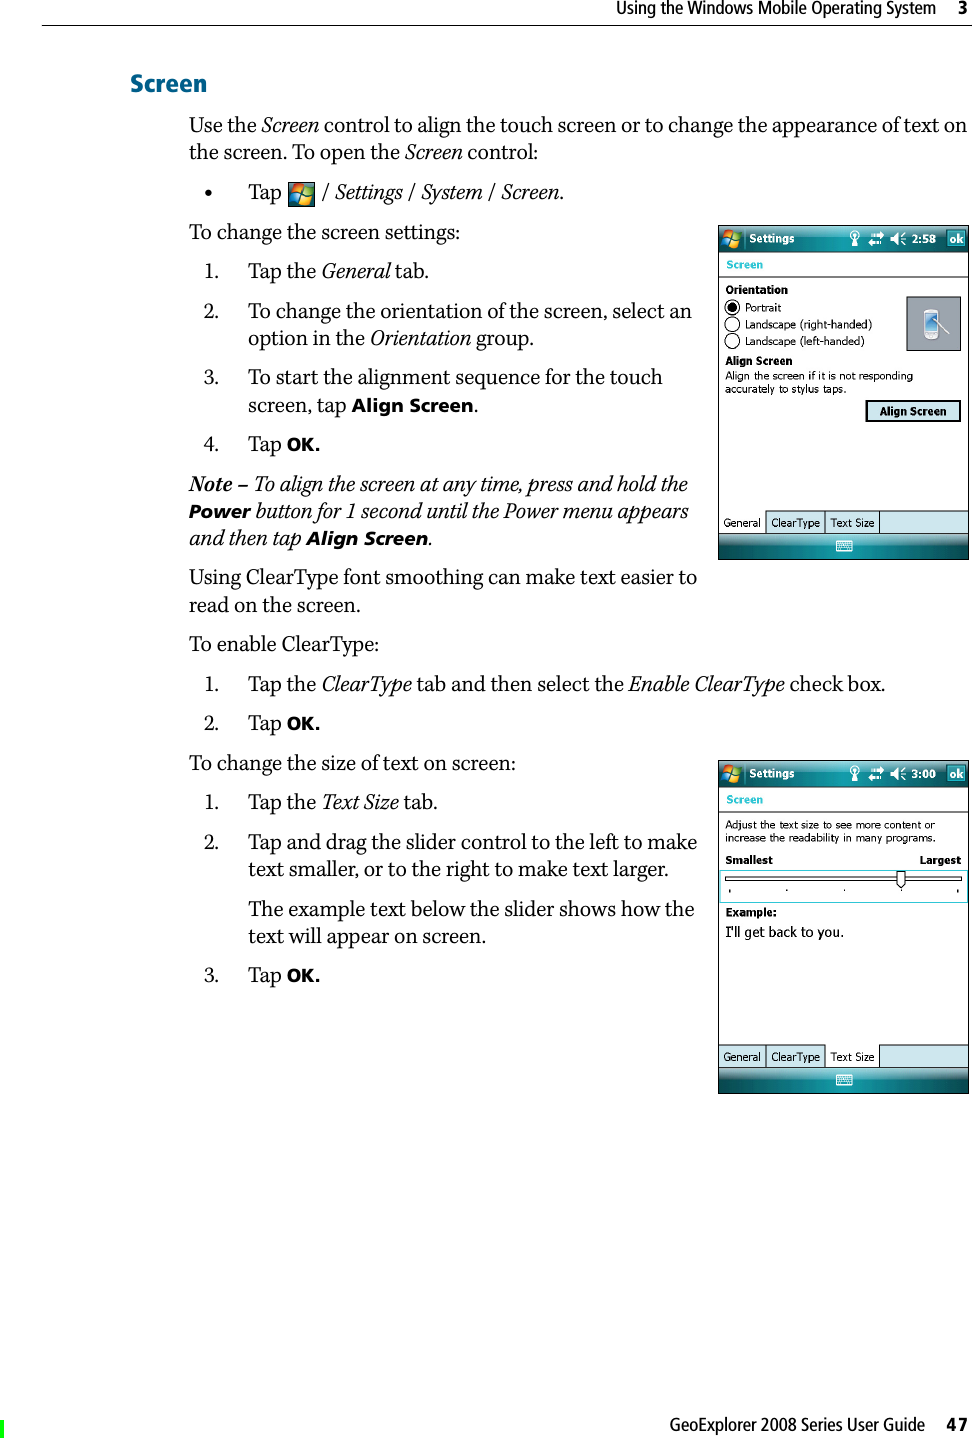 GeoExplorer 2008 Series User Guide     47Using the Windows Mobile Operating System     3ScreenUse the Screen control to align the touch screen or to change the appearance of text on the screen. To open the Screen control: •Tap / Settings /System / Screen.To change the screen settings:1. Tap the General tab.2. To change the orientation of the screen, select an option in the Orientation group.3. To start the alignment sequence for the touch screen, tap Align Screen. 4. Tap OK.Note – To align the screen at any time, press and hold the Power button for 1 second until the Power menu appears and then tap Align Screen.Using ClearType font smoothing can make text easier to read on the screen.To enable ClearType:1. Tap the ClearType tab and then select the Enable ClearType check box. 2. Tap OK.To change the size of text on screen:1. Tap the Text Size tab. 2. Tap and drag the slider control to the left to make text smaller, or to the right to make text larger. The example text below the slider shows how the text will appear on screen.3. Tap OK.